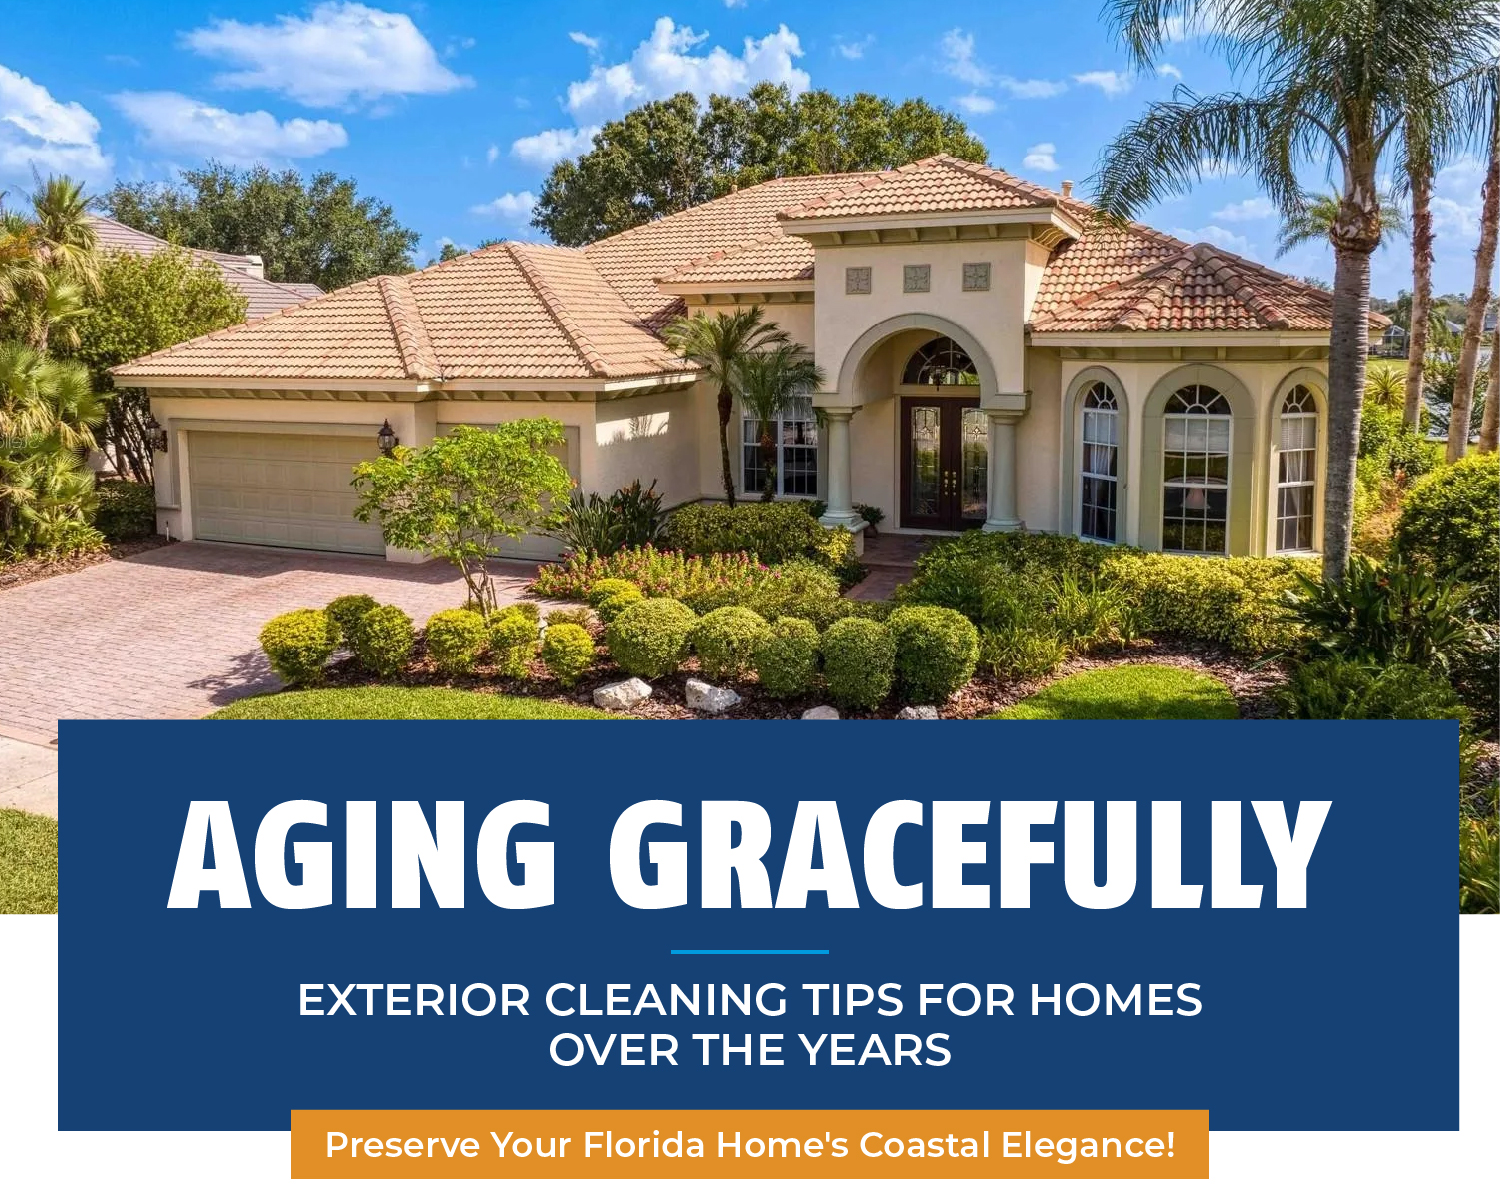 Aging Gracefully: Exterior Cleaning Tips for Homes Over the Years